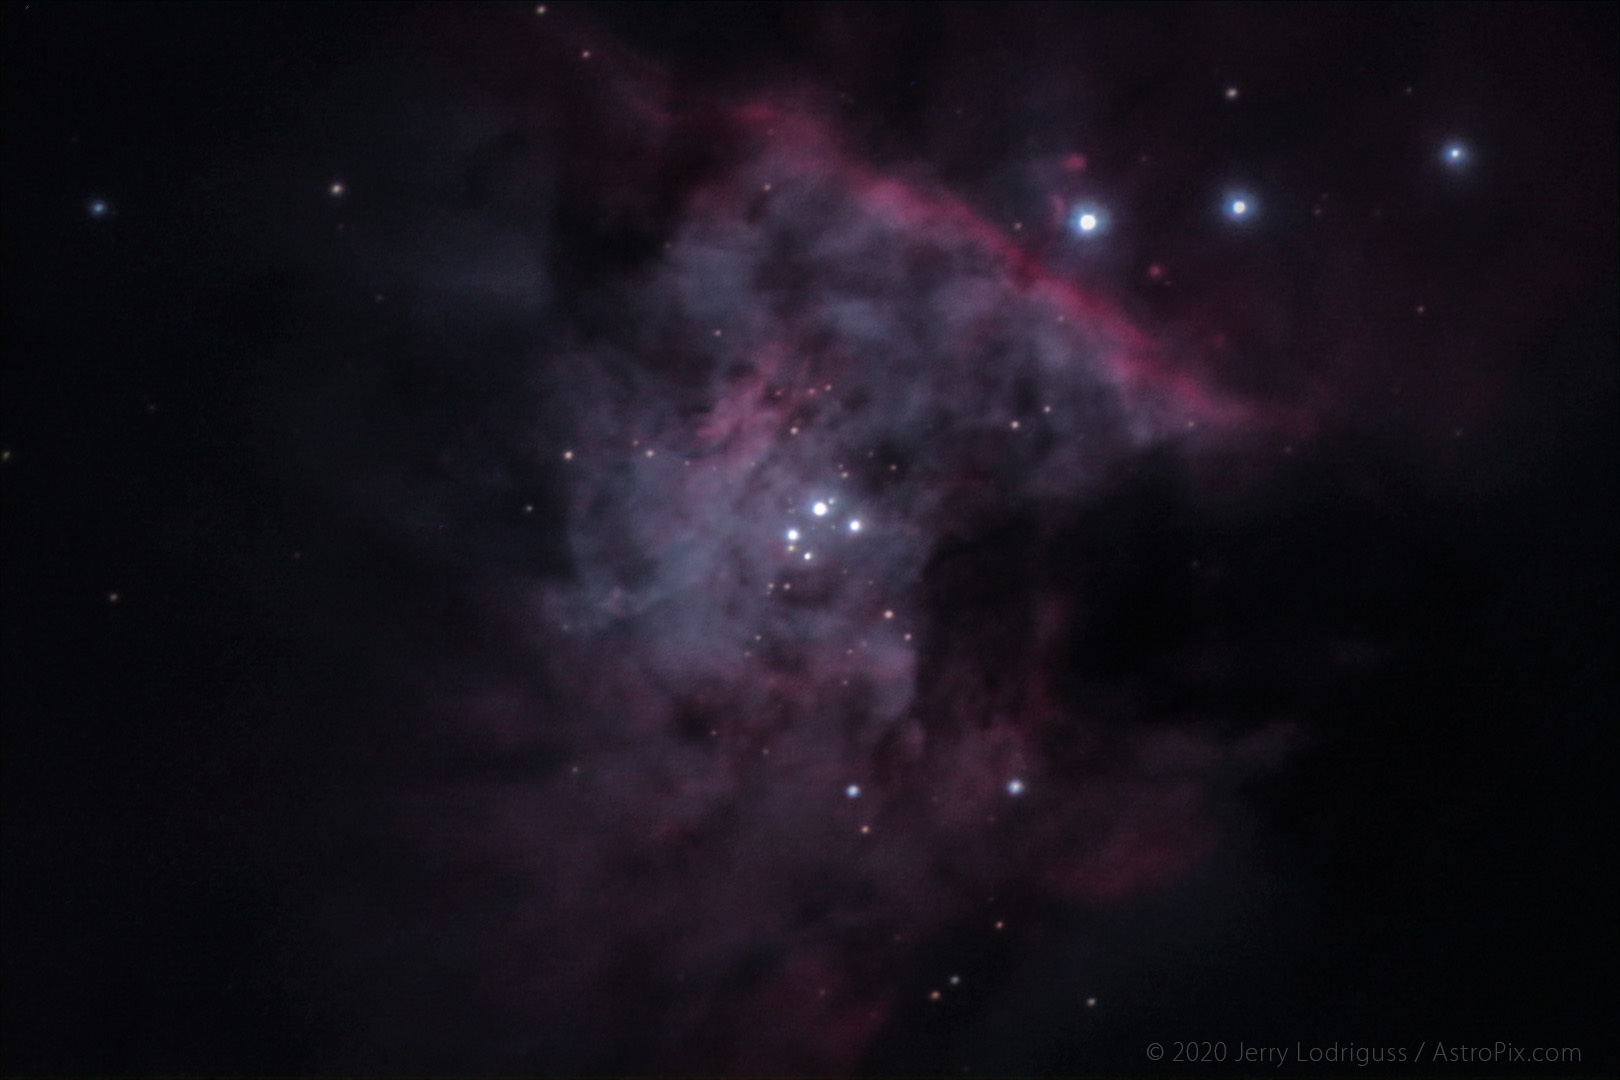 Thera Orionis, The Trapezium multiple star system in the heart of M42, The Orion Nebula.